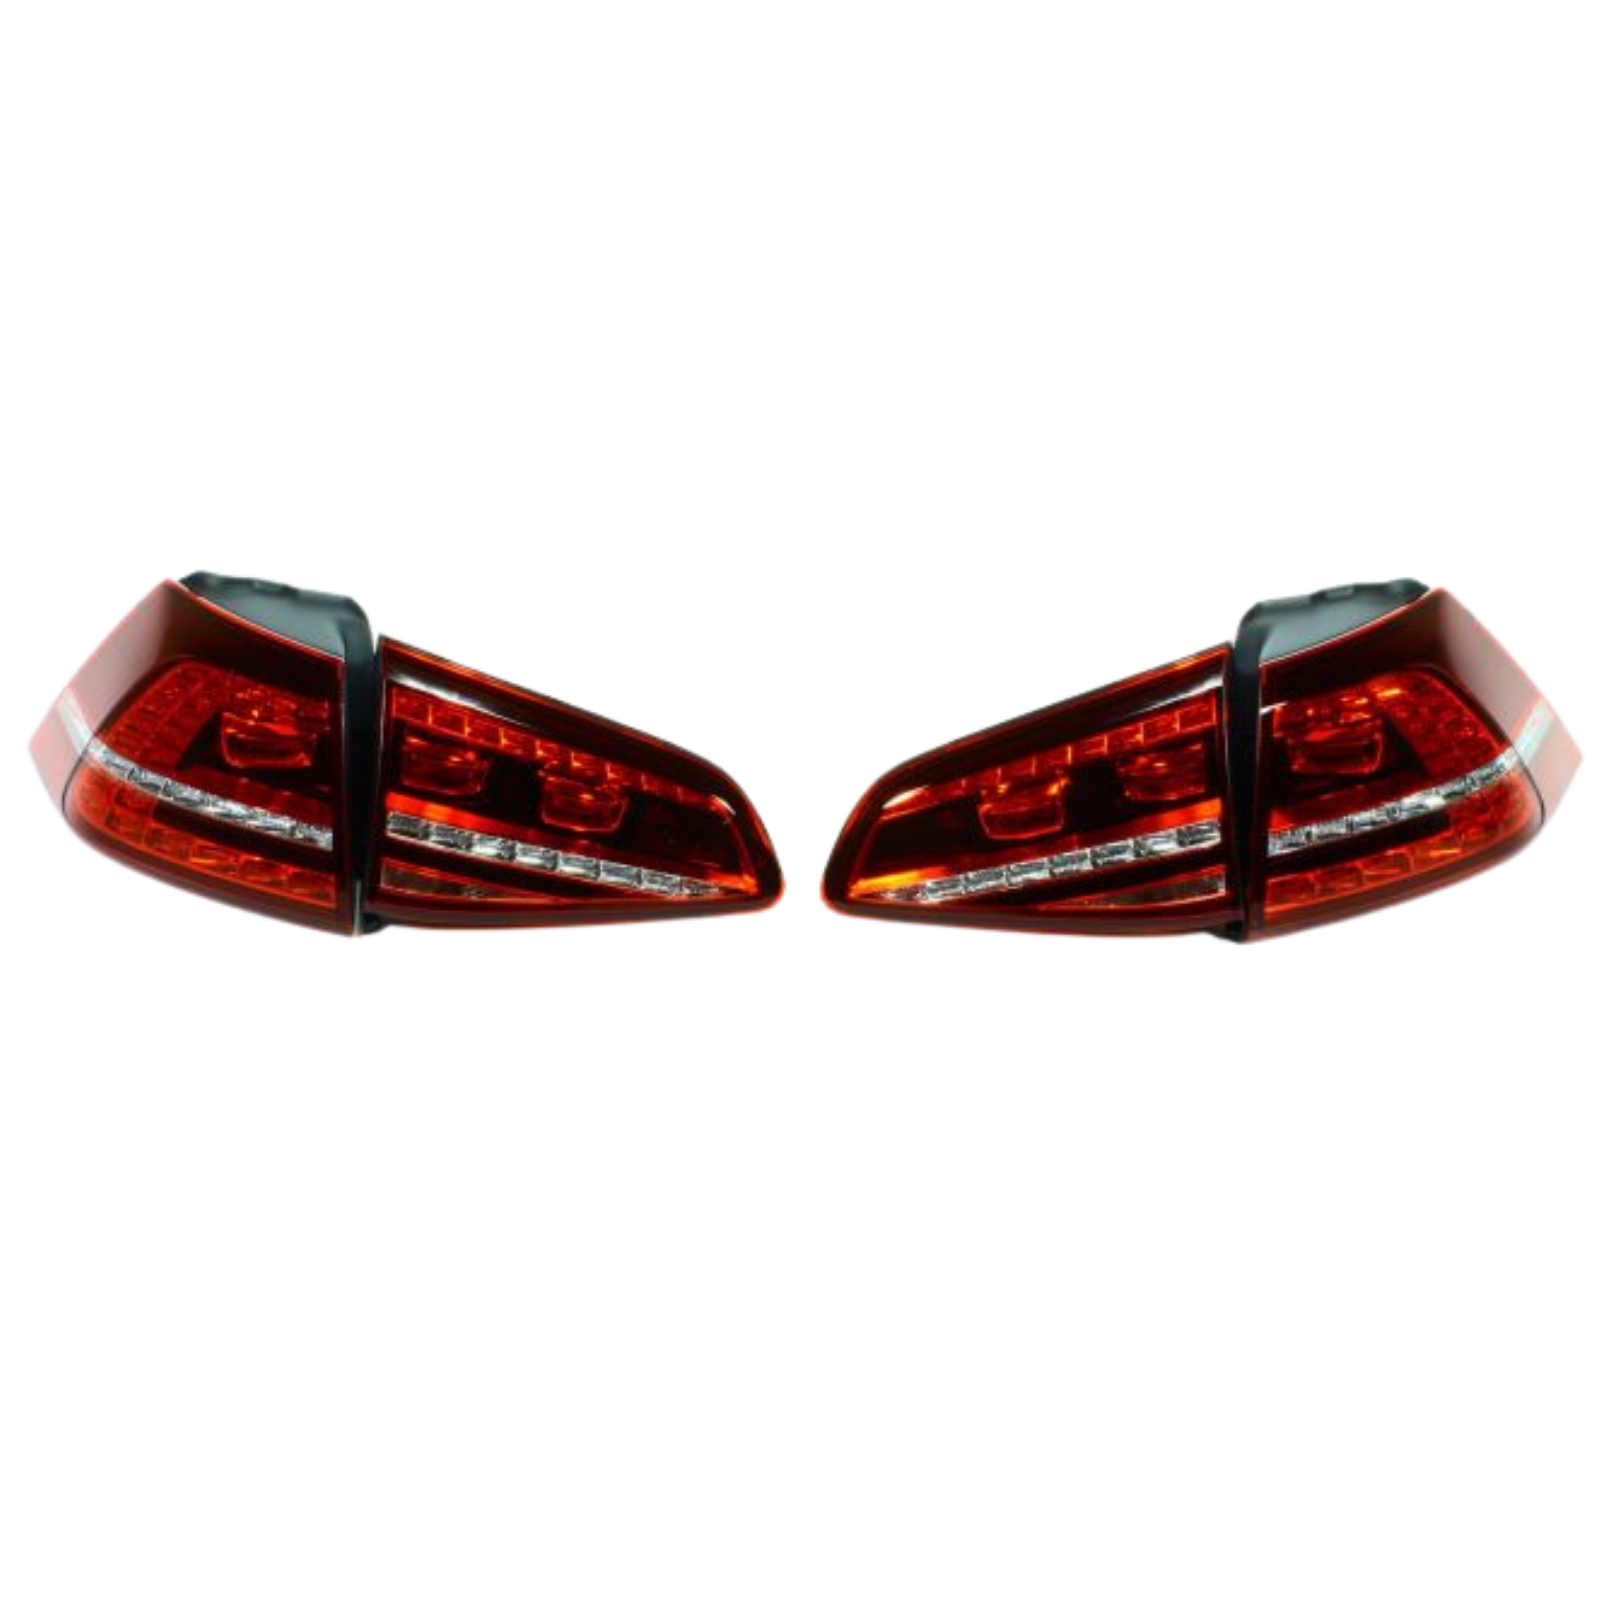 VW MK7 GOLF OEM STYLE SEQUENTIAL LED TAILLIGHTS